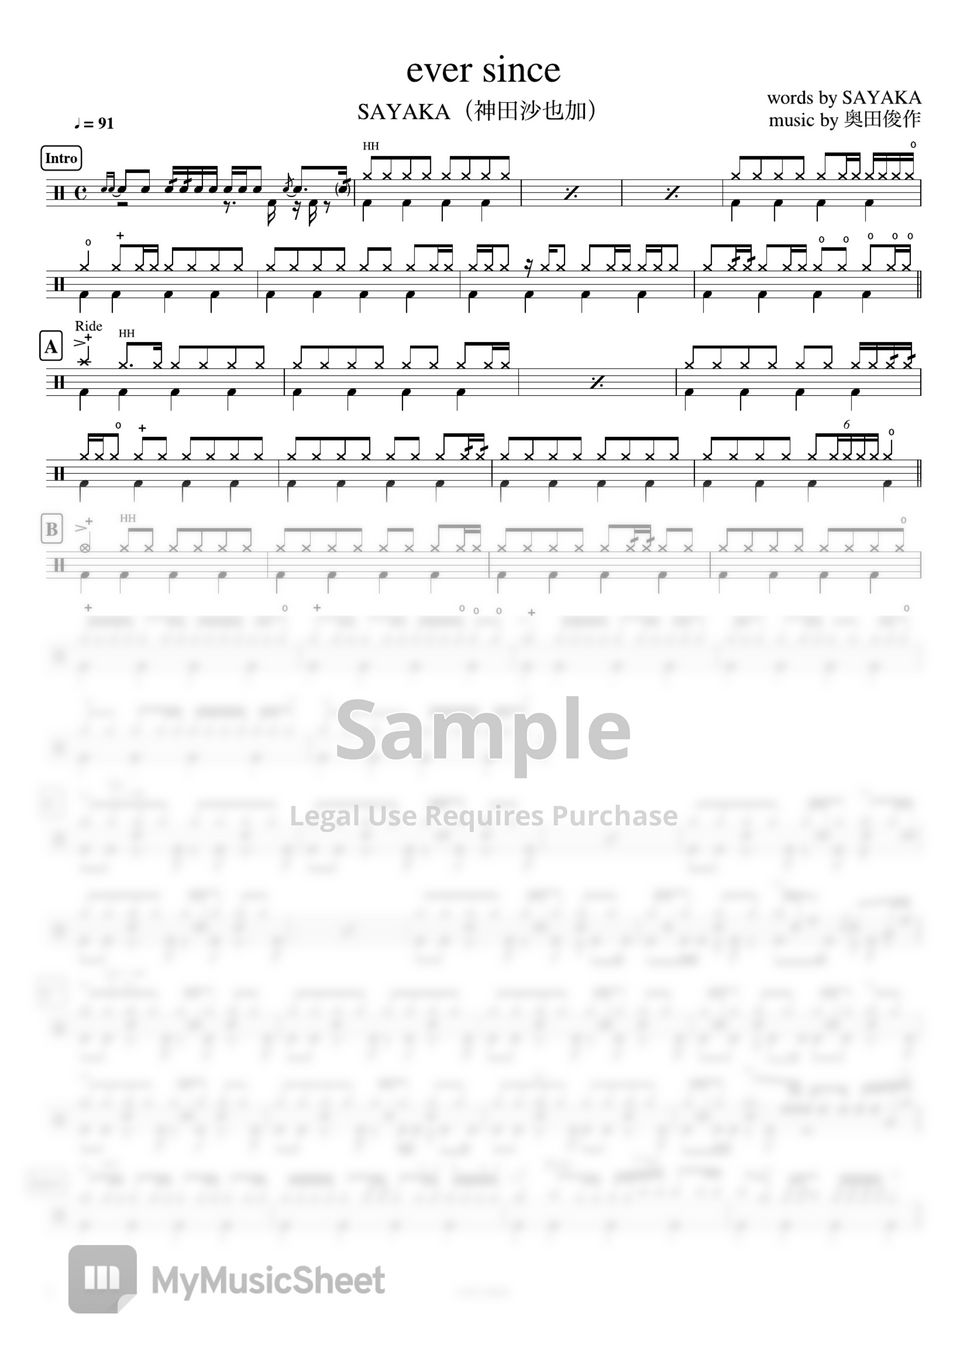 SAYAKA - ever since Sheets by Cookai's J-pop Drum sheet music!!!